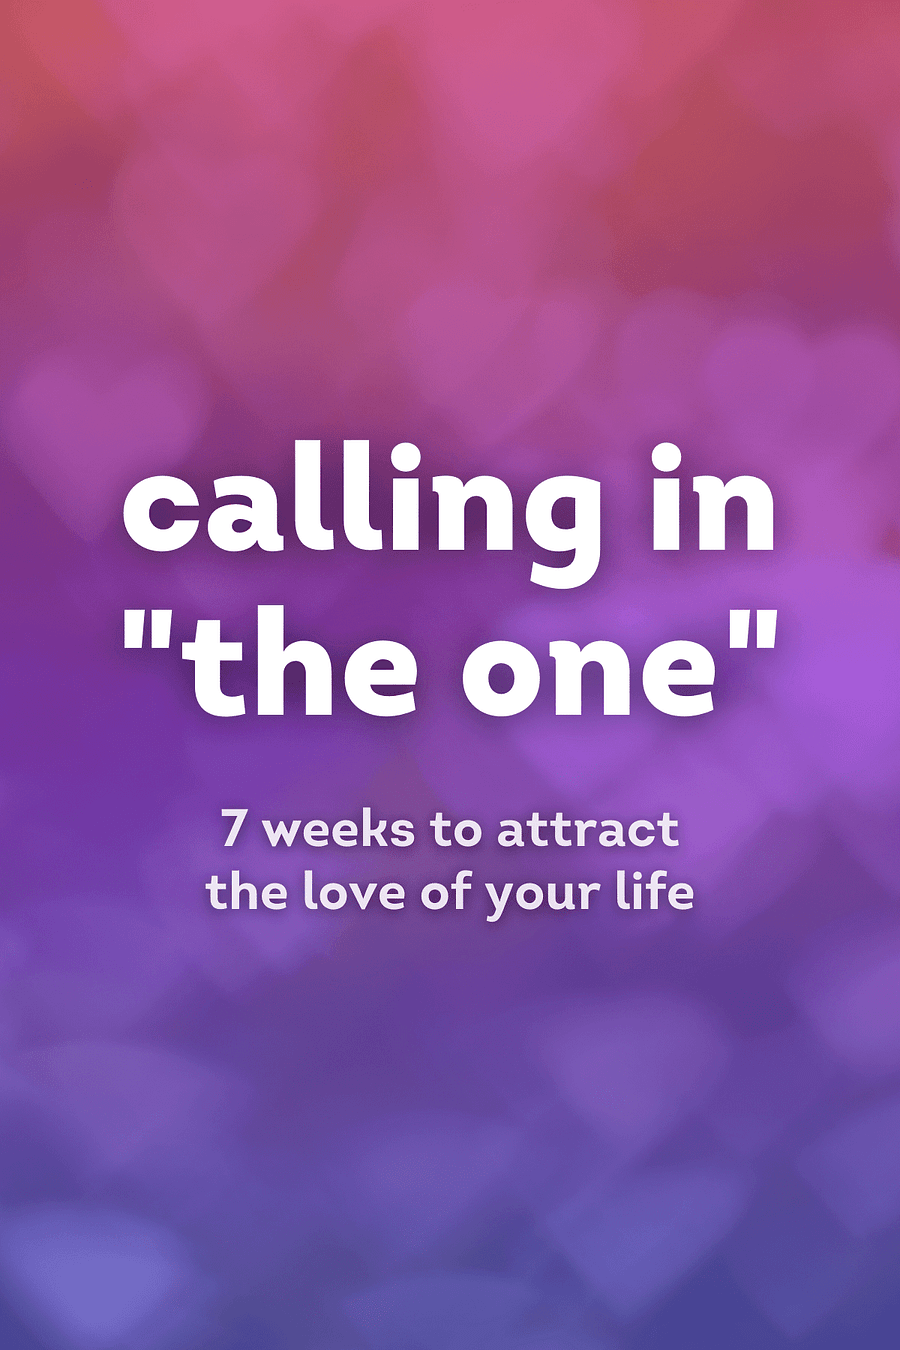 Calling in "The One" Revised and Expanded by Katherine Woodward Thomas - Book Summary